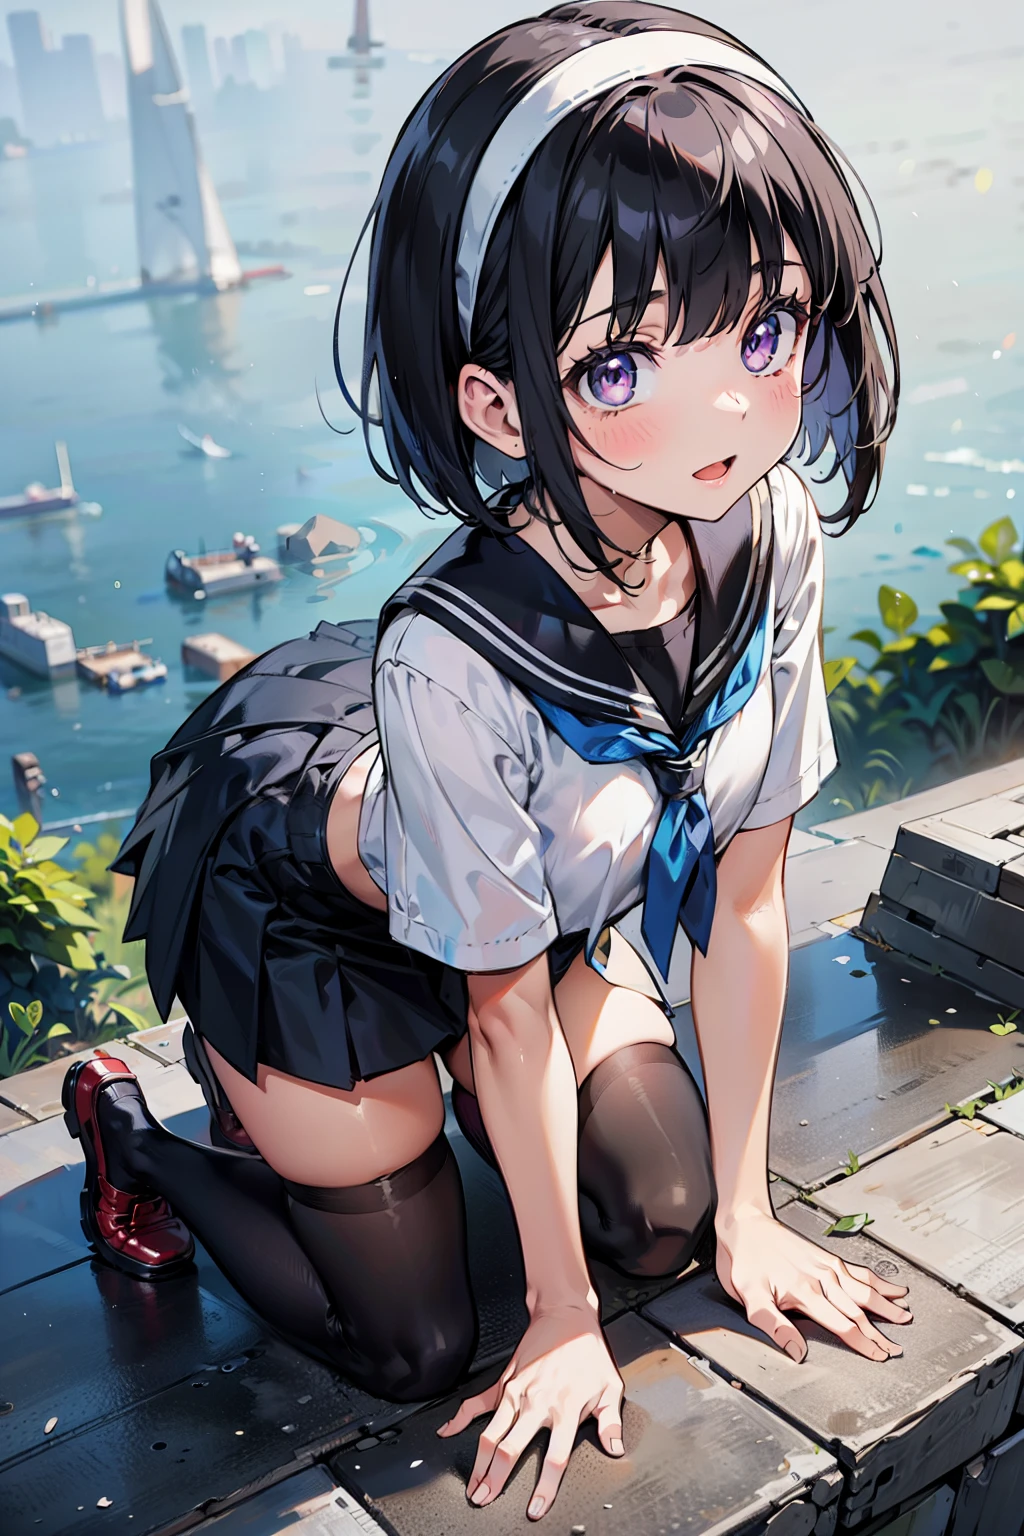 body 8 times longer than head, (Highly detailed CG unity 8k), (highest quality)，(very detailed)，(ultra high resolution), black hair, High school girl wearing a navy sailor suit, Anime 2D rendering, realistic young anime high school girl, ((White headband)), purple eyes, small breasts, tall, slanted eyes, (school scenery), black stockings, bright color, open your mouth, Dark blue skirt, bob cut, position looking down from above,  tripping on the right foot, lean forward, Put your butt on the ground, 